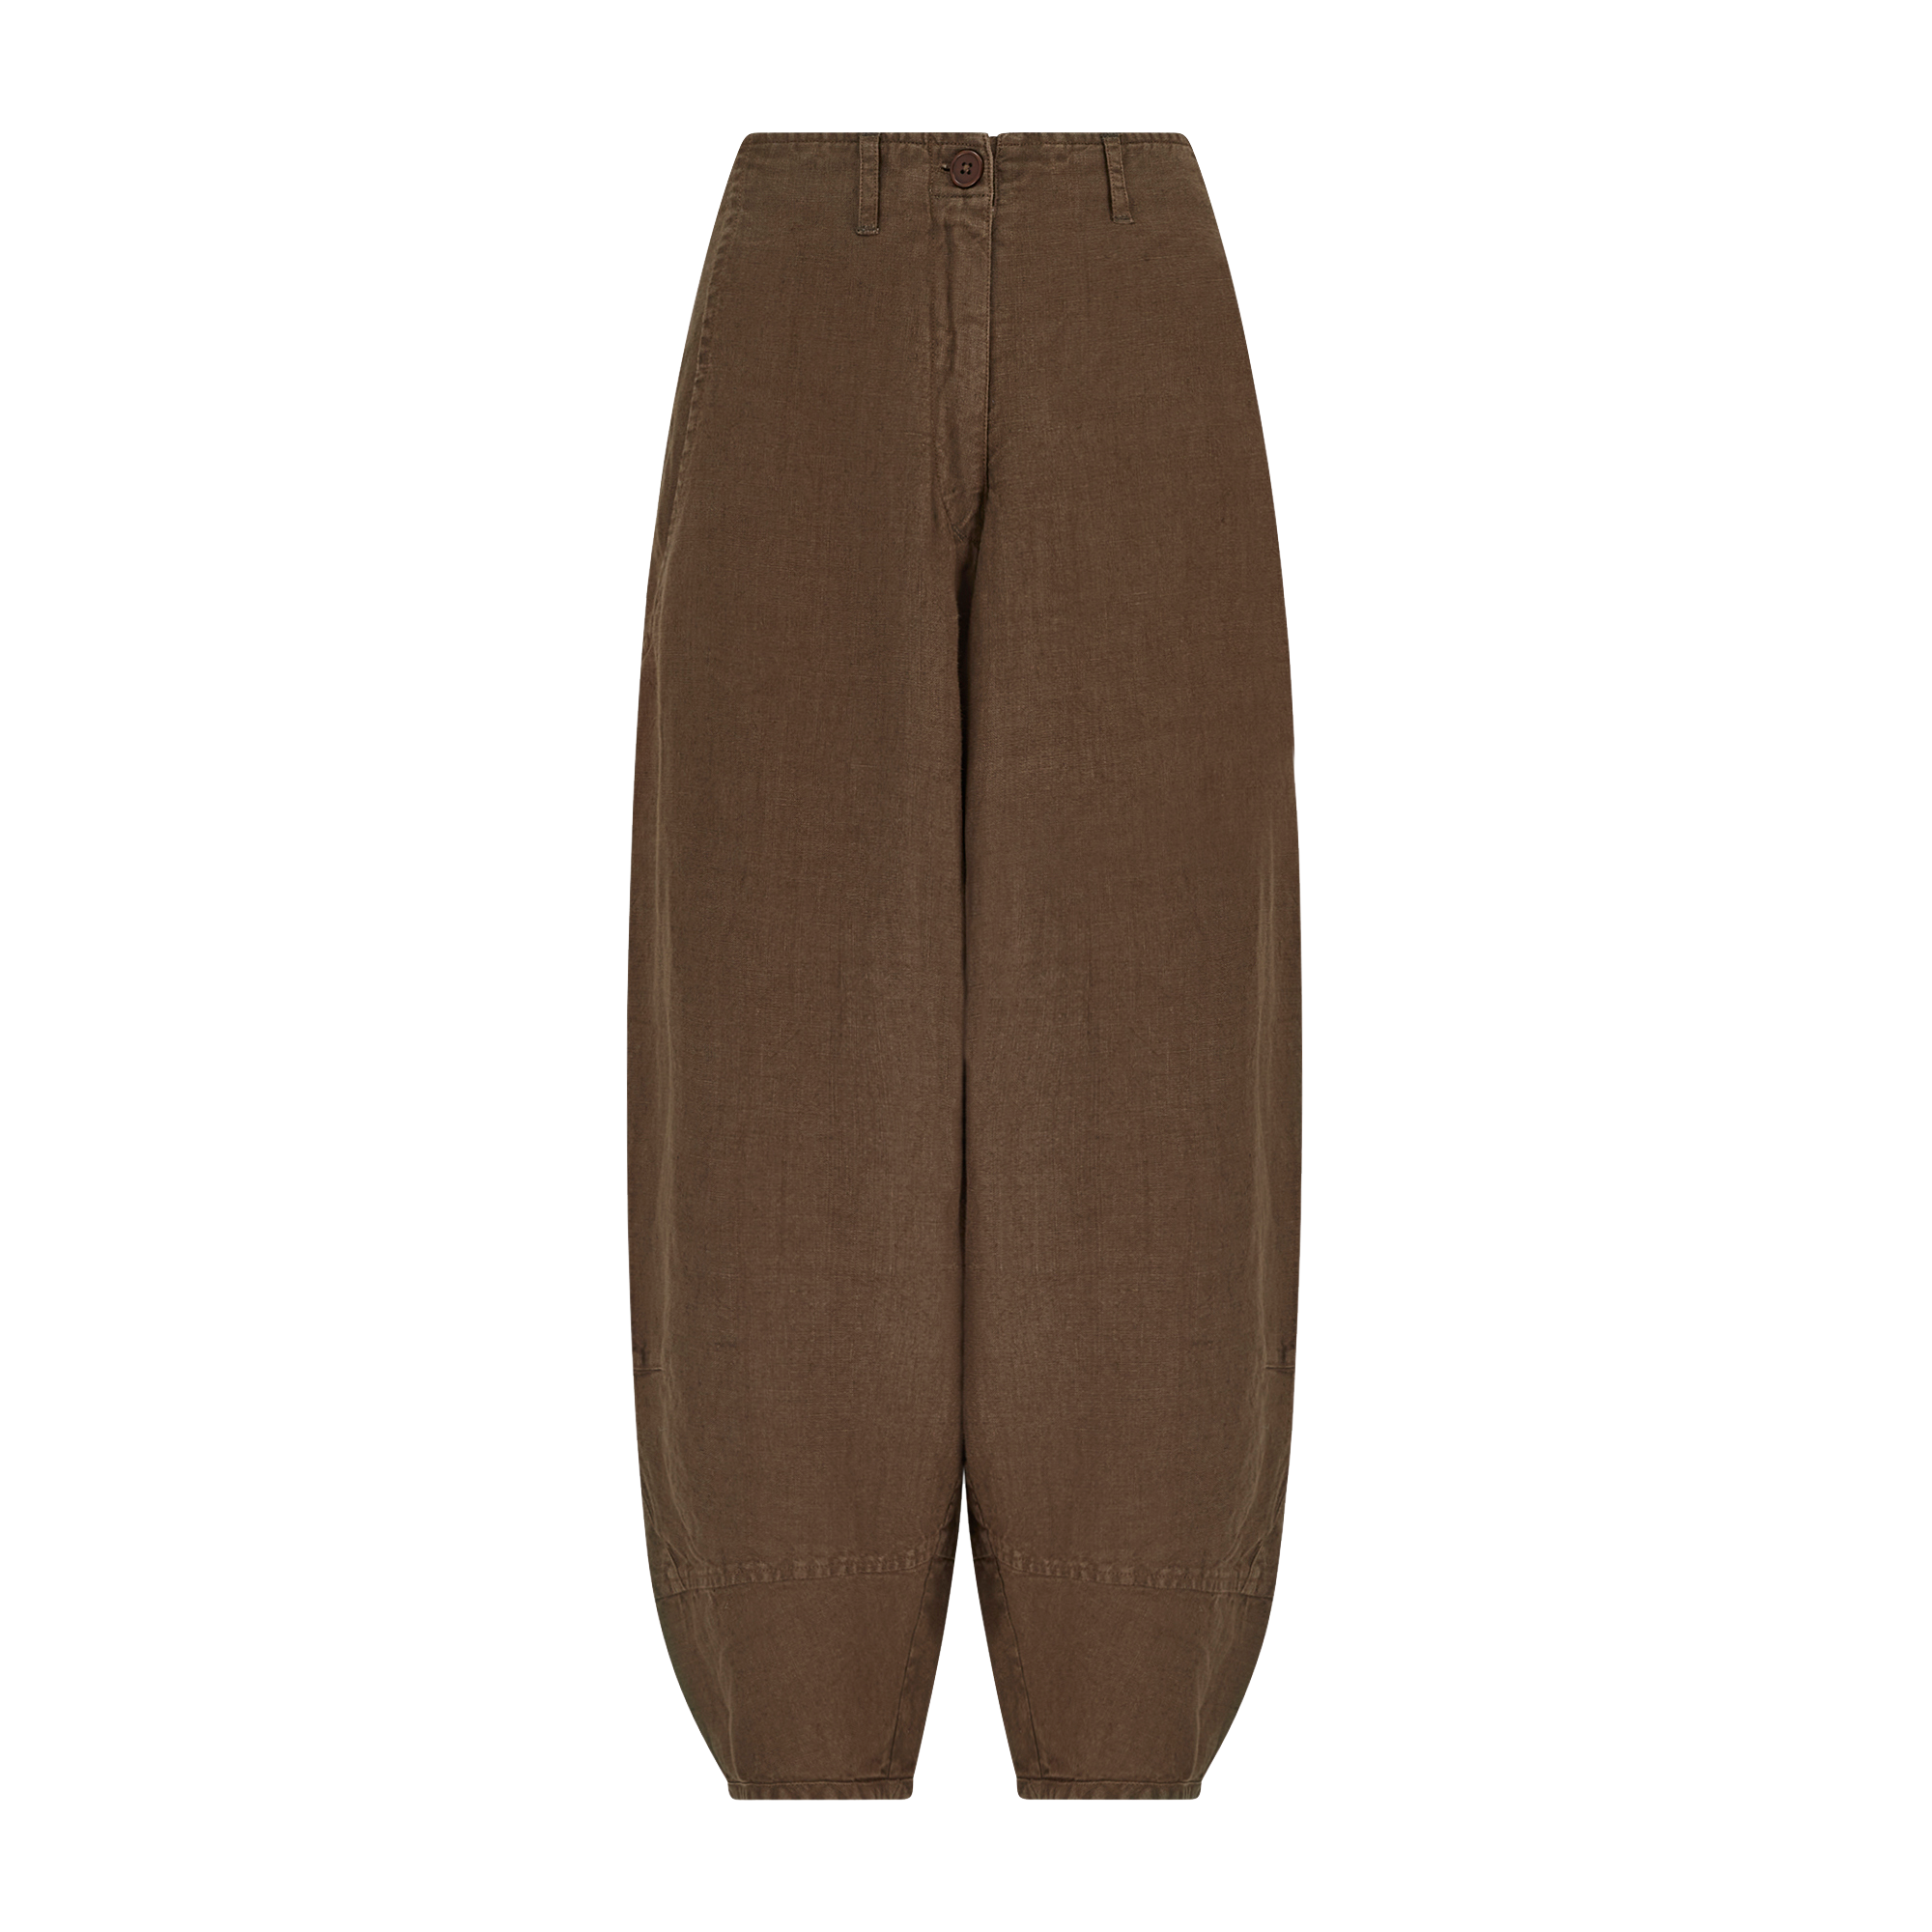 The Workwear Trousers